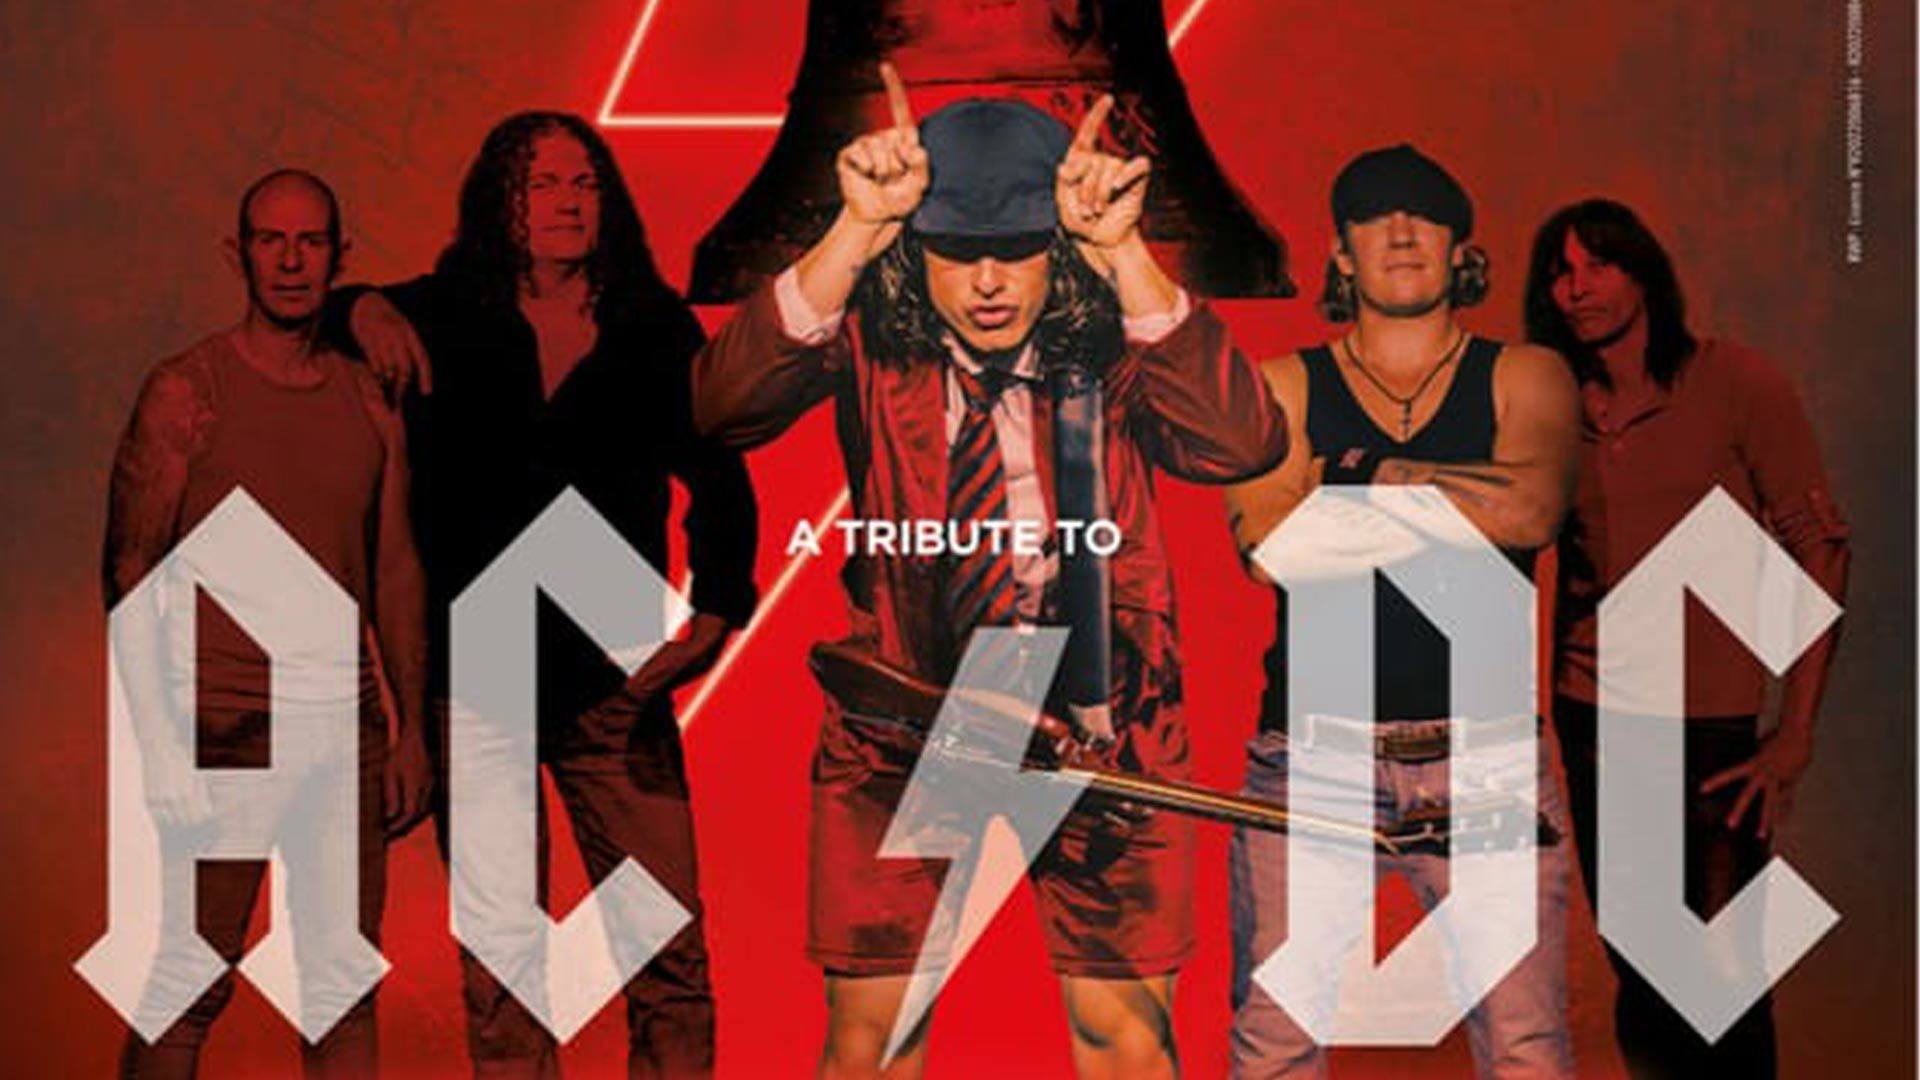 The 5 Rosies - Highway to hell tour "Tribute to AC/DC" à Sausheim